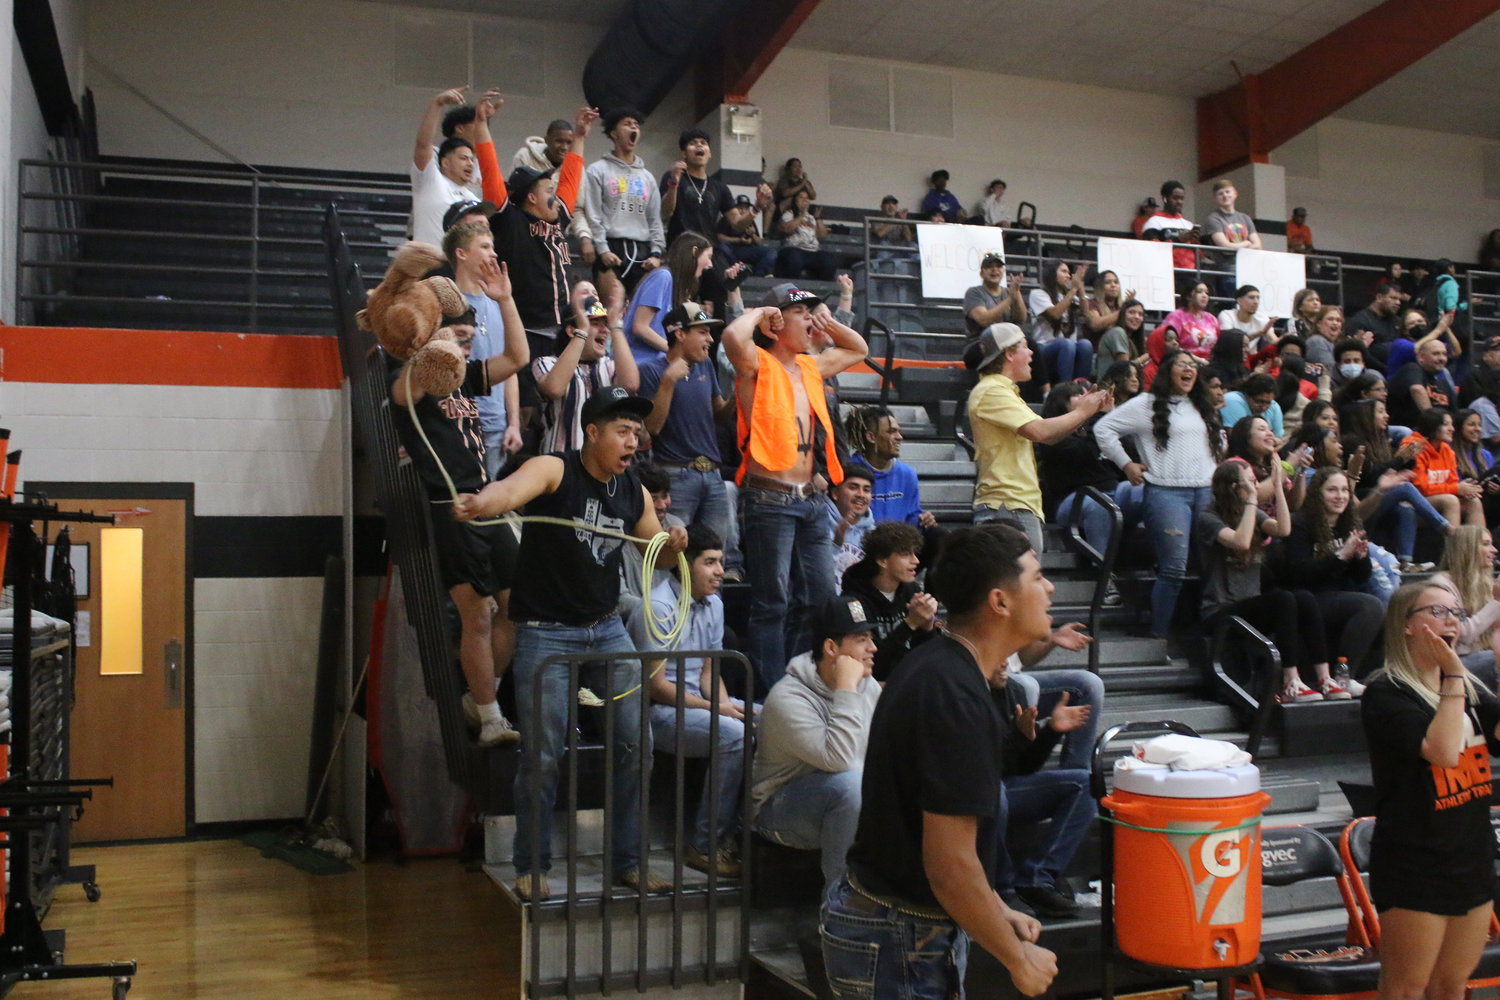 The Gonzales High School student section went wild every time the Apaches scored in Tuesday night’s game. Students painted their chests and swung around a teddy bear tied to a rope since Gonzales was hosting the La Vernia Bears. They also heckled opposing players any time at every opportunity.